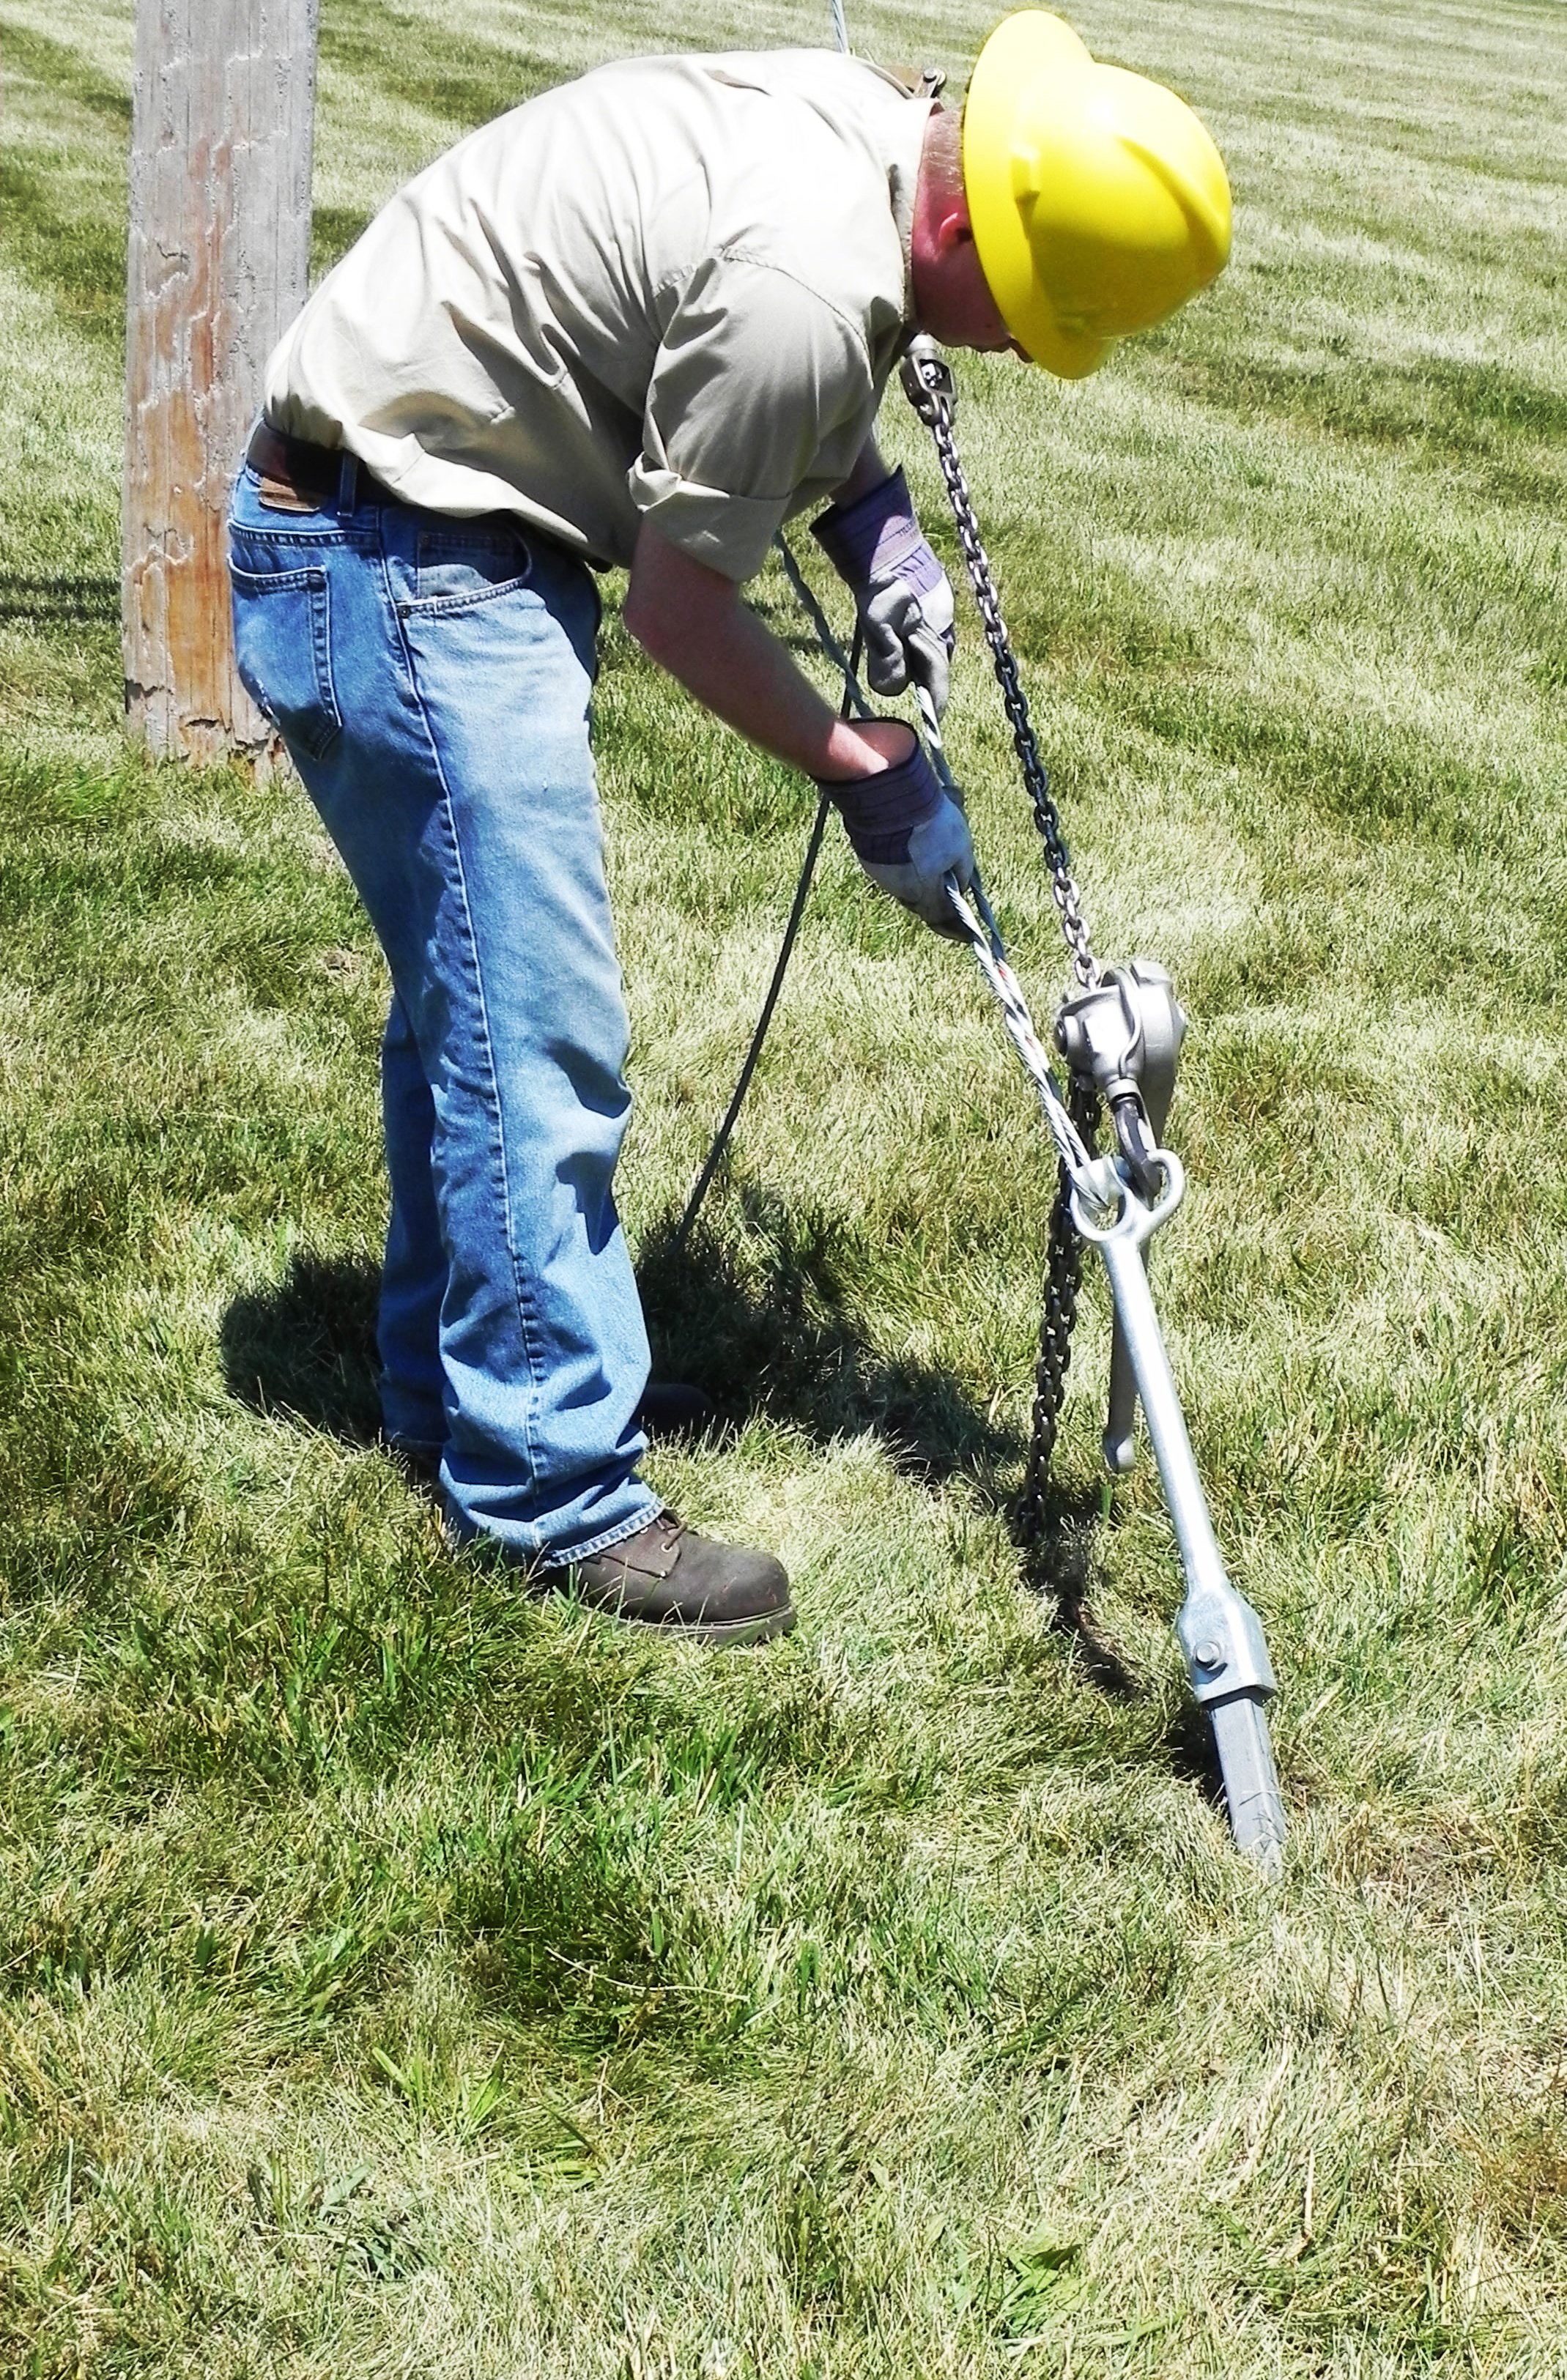 12 Steps to Install Earth Anchors: Round Rod and SS Anchors